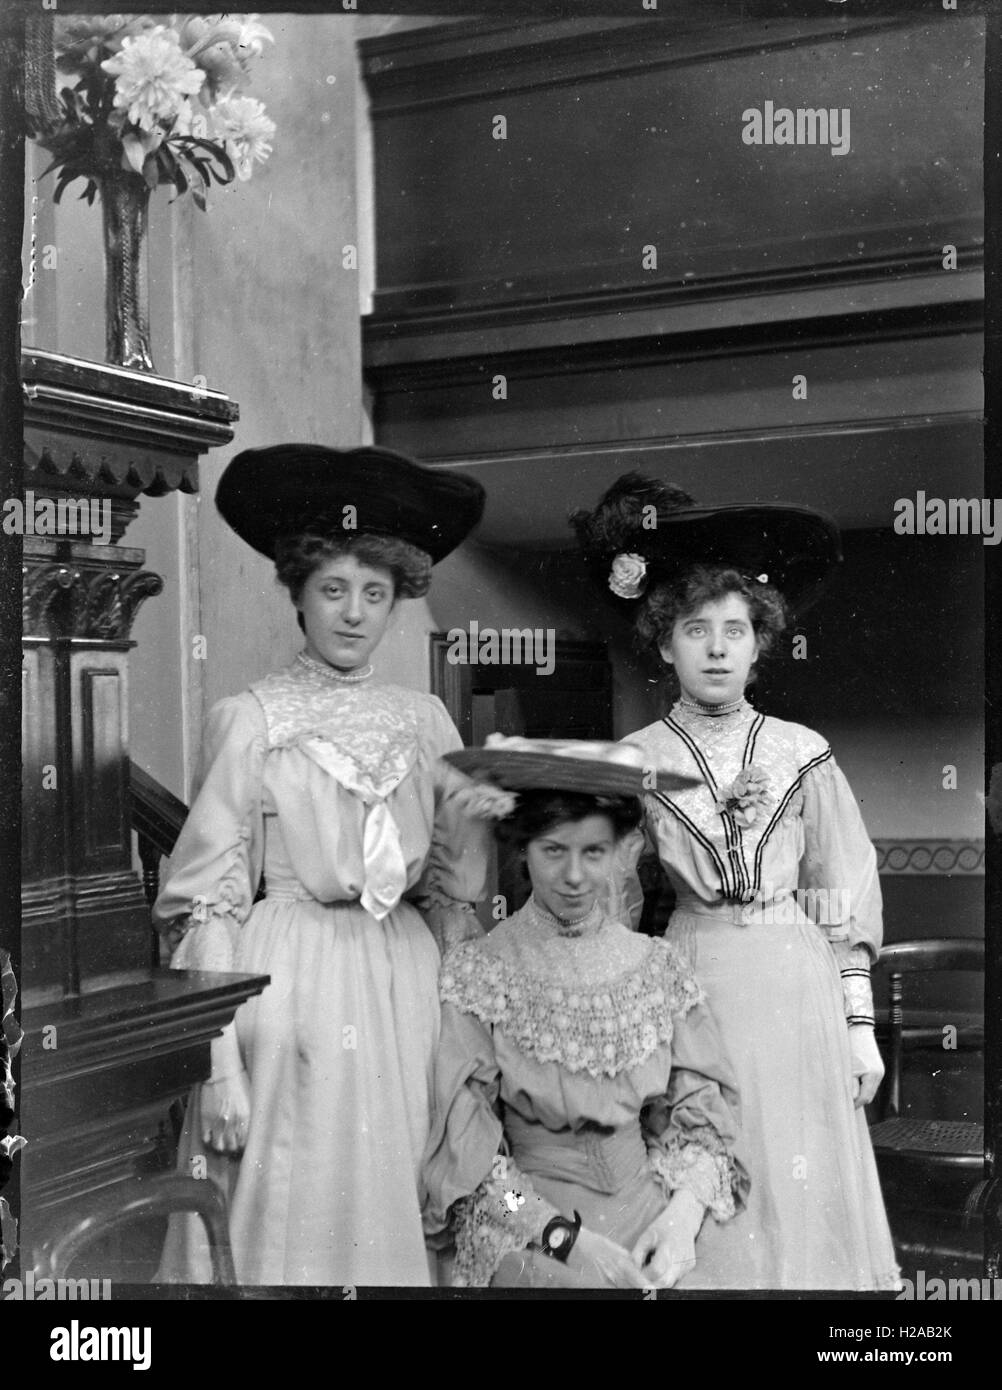 Young ladies in dresses and hats c1900. Photo by Tony Henshaw Stock Photo